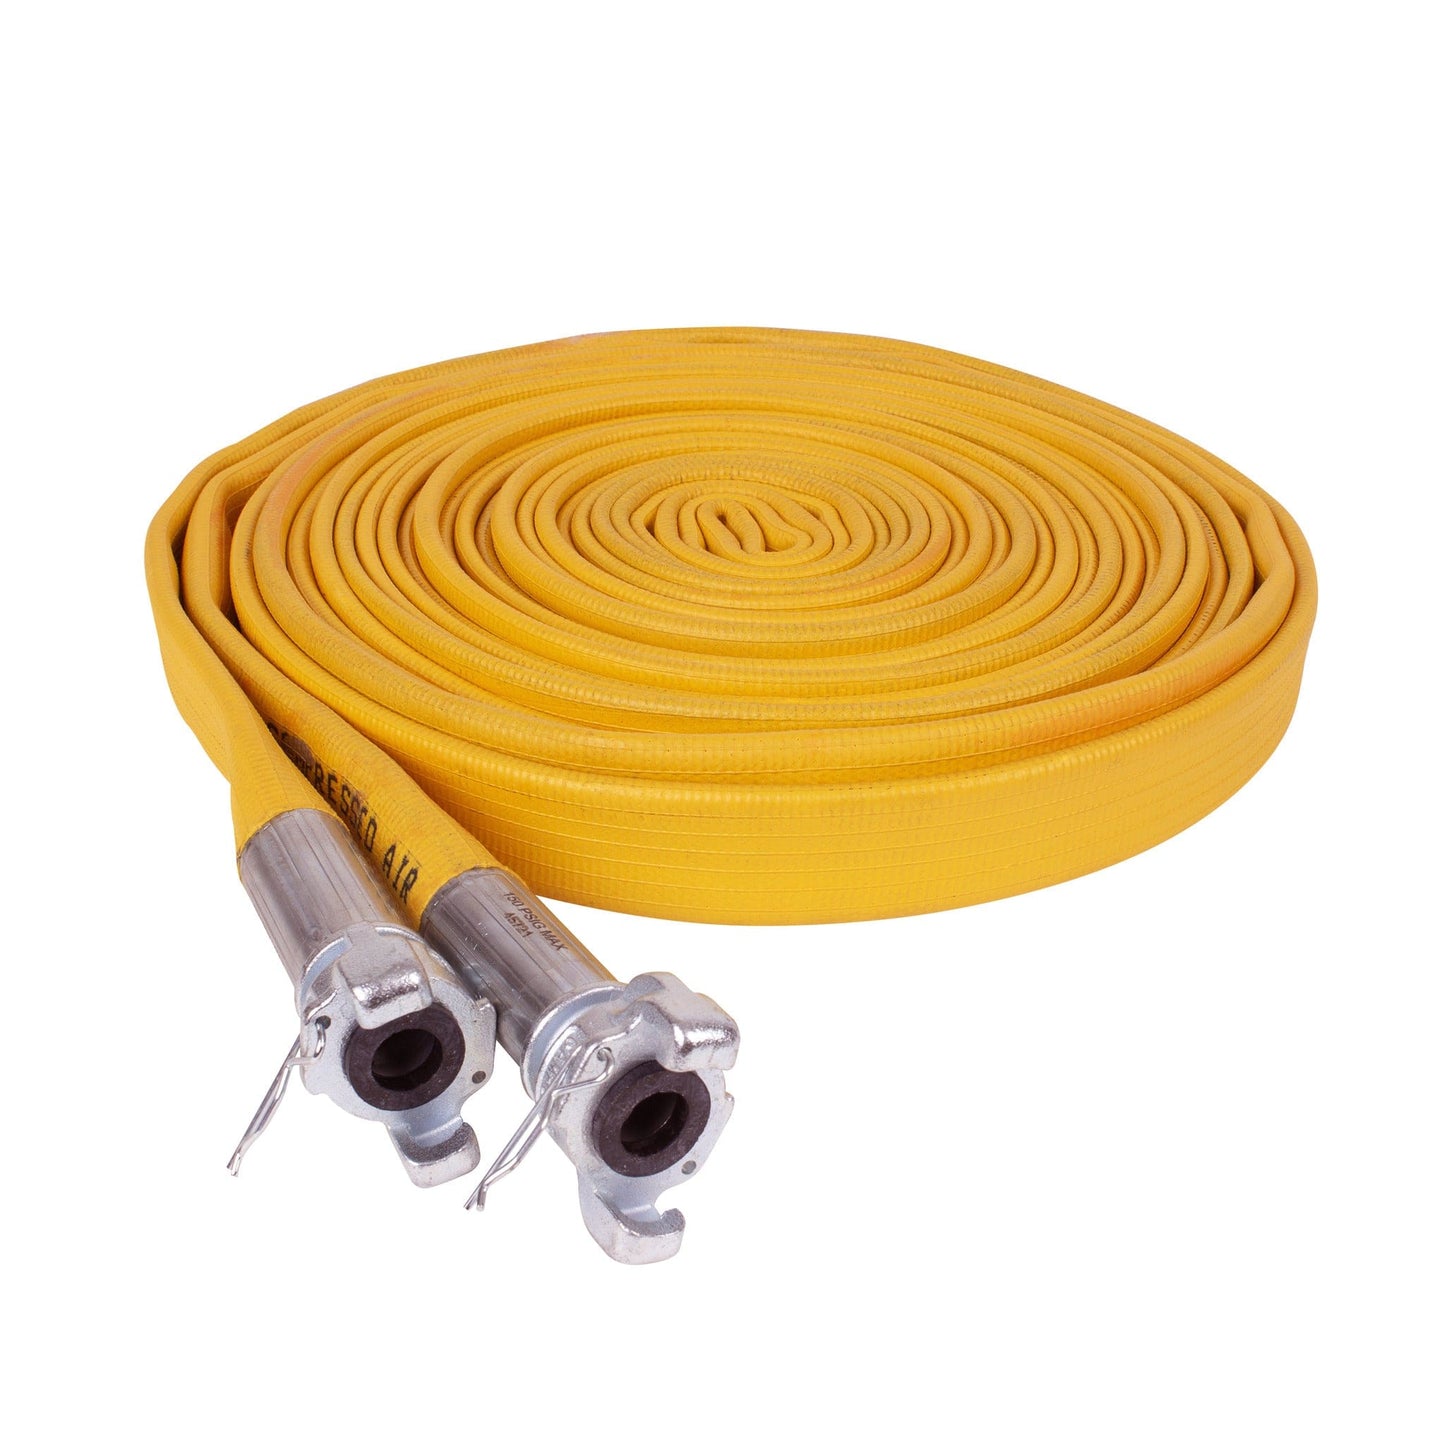 Lightweight Air Hose Assembly with Couplings - 1" ID x 50' (HT112)